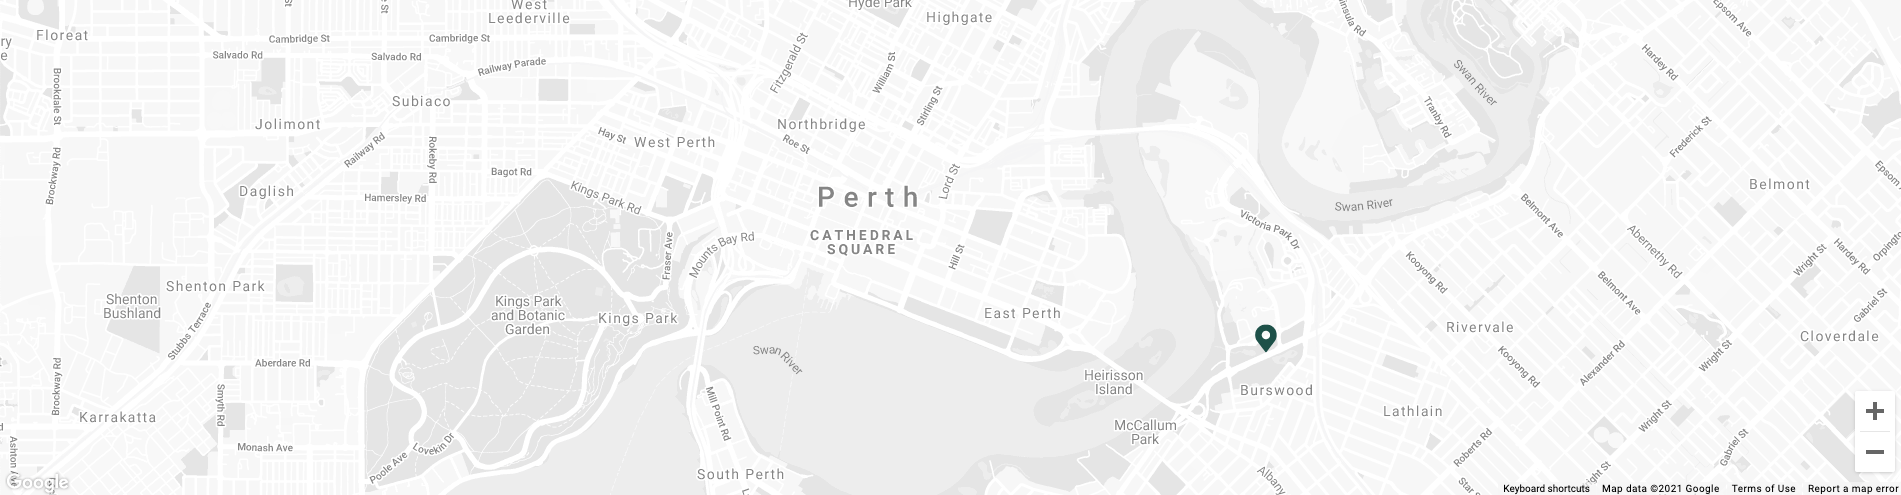 Map image of Crown Towers Perth